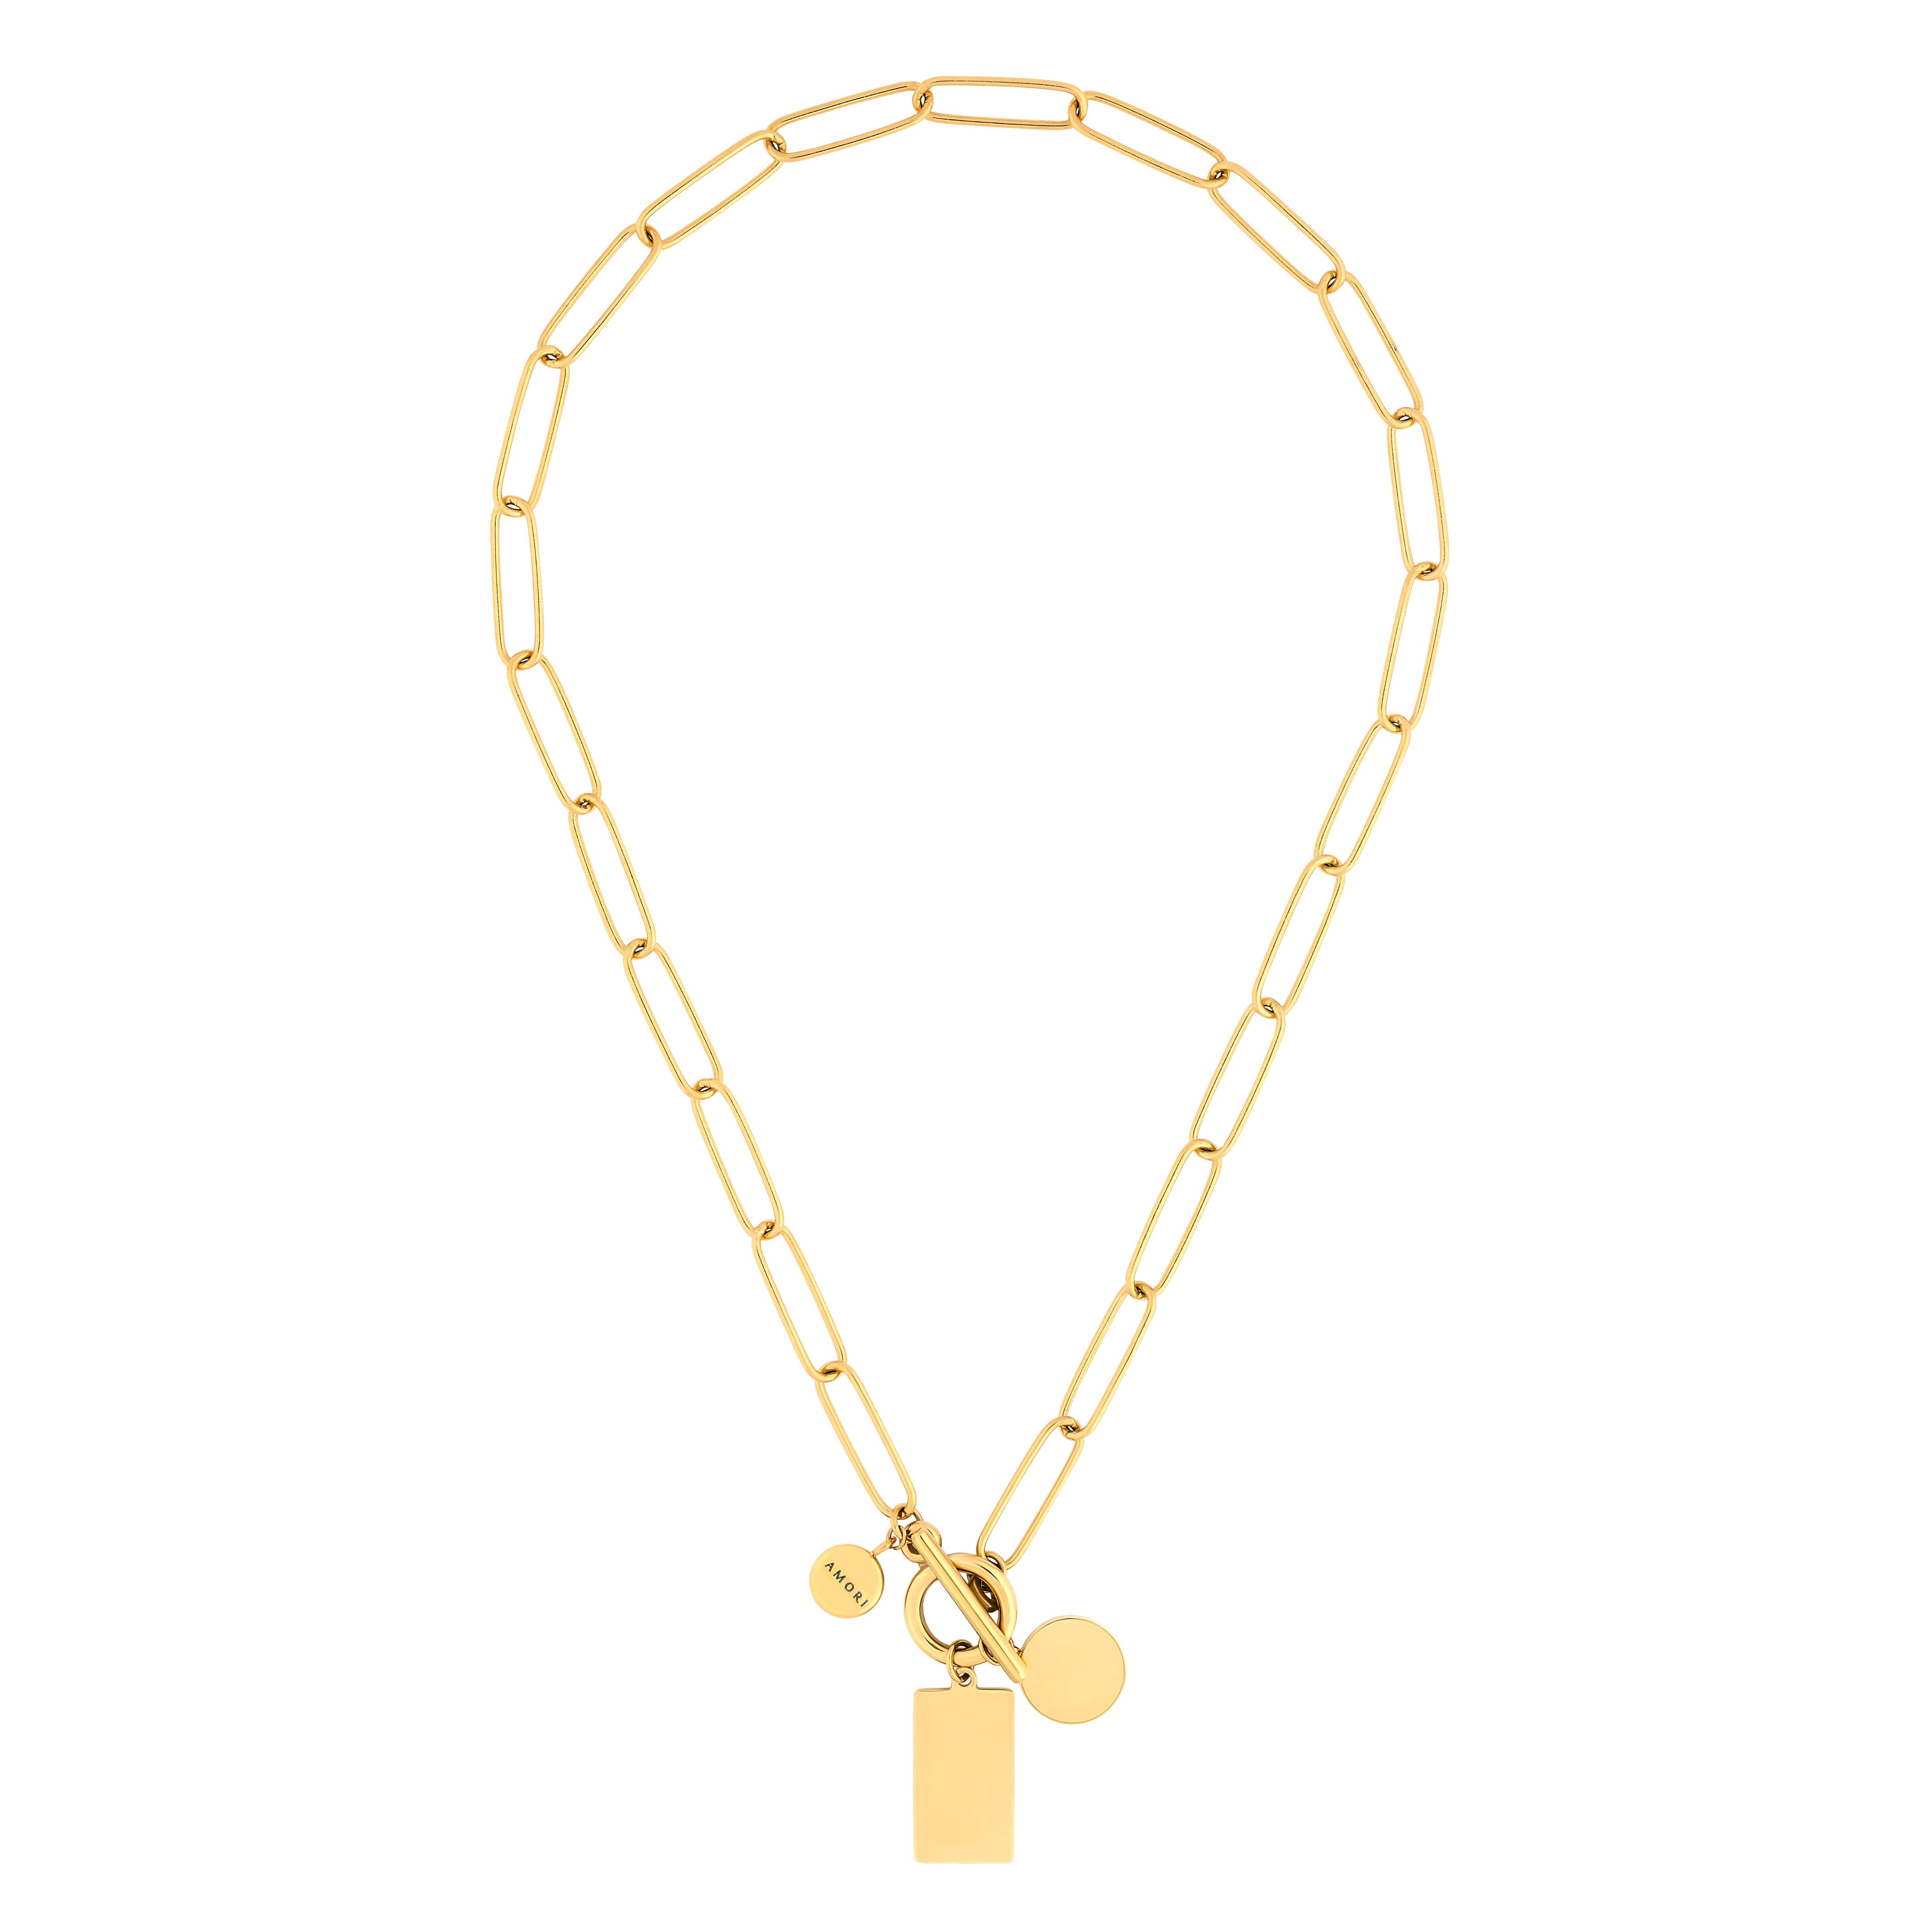 TAB NECKLACE - GOLD